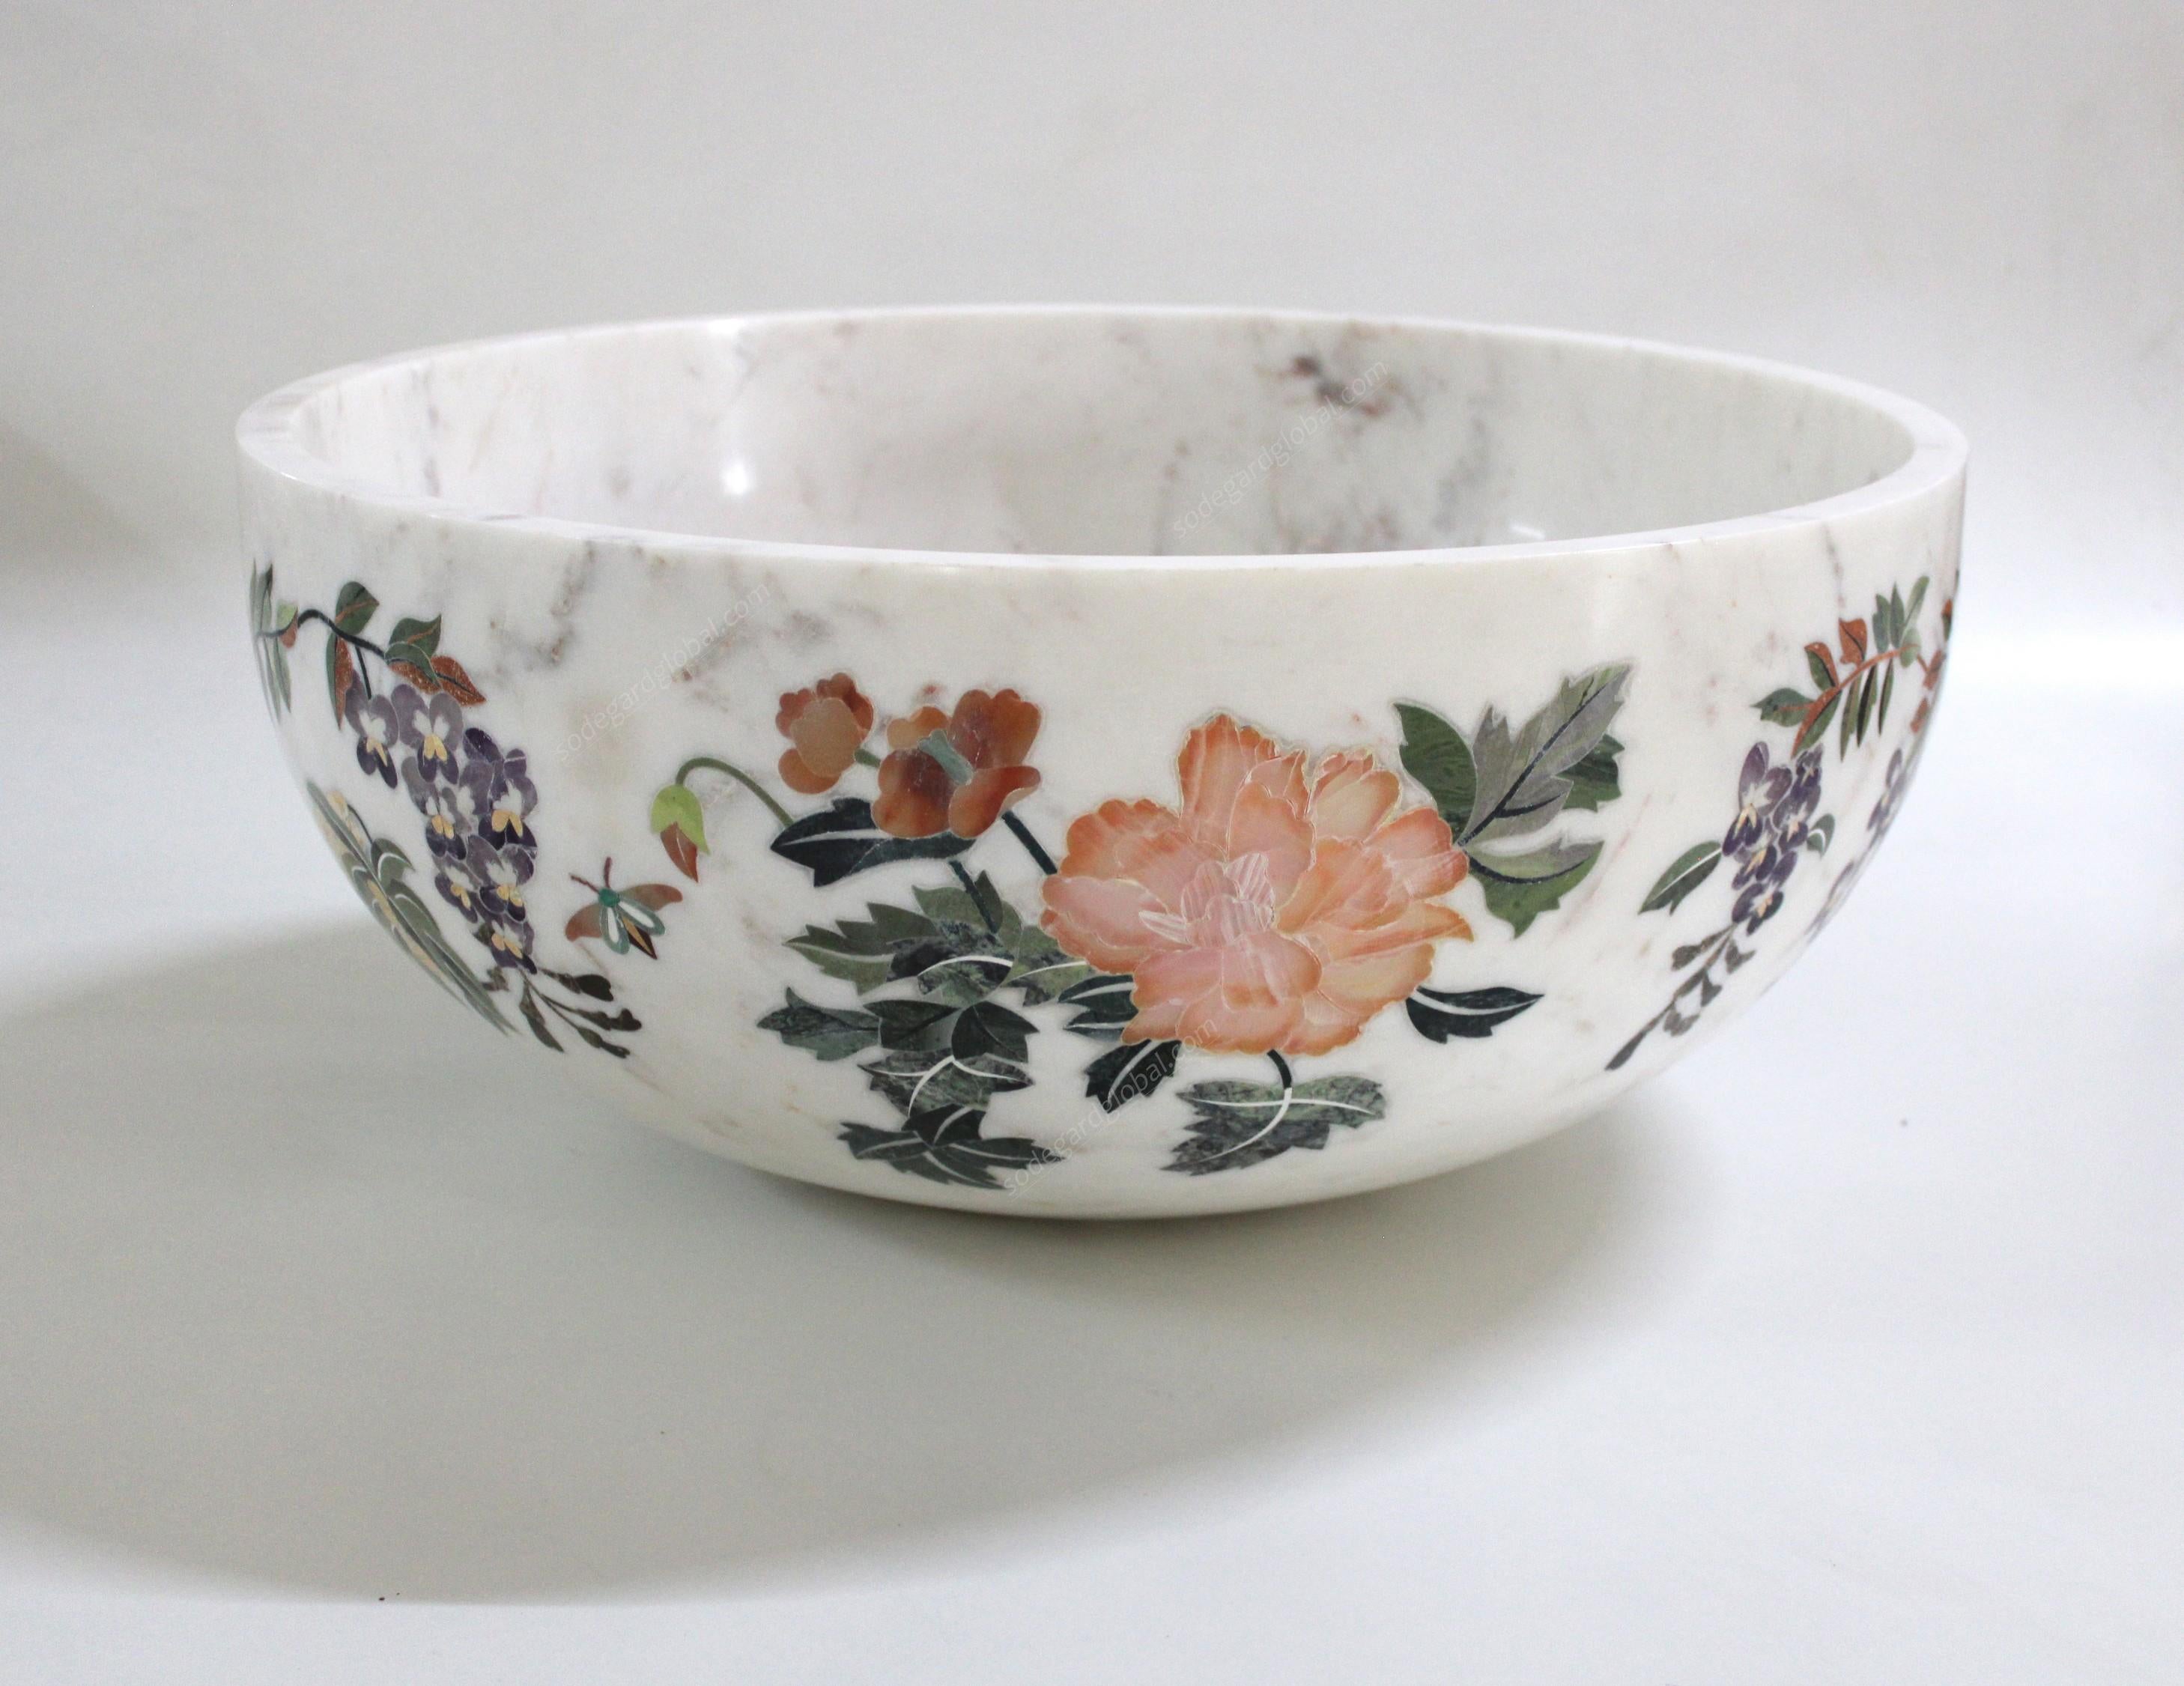 Contemporary Handmade Ornamenti Bowl Inlay in White Marble by Stephanie Odegard For Sale